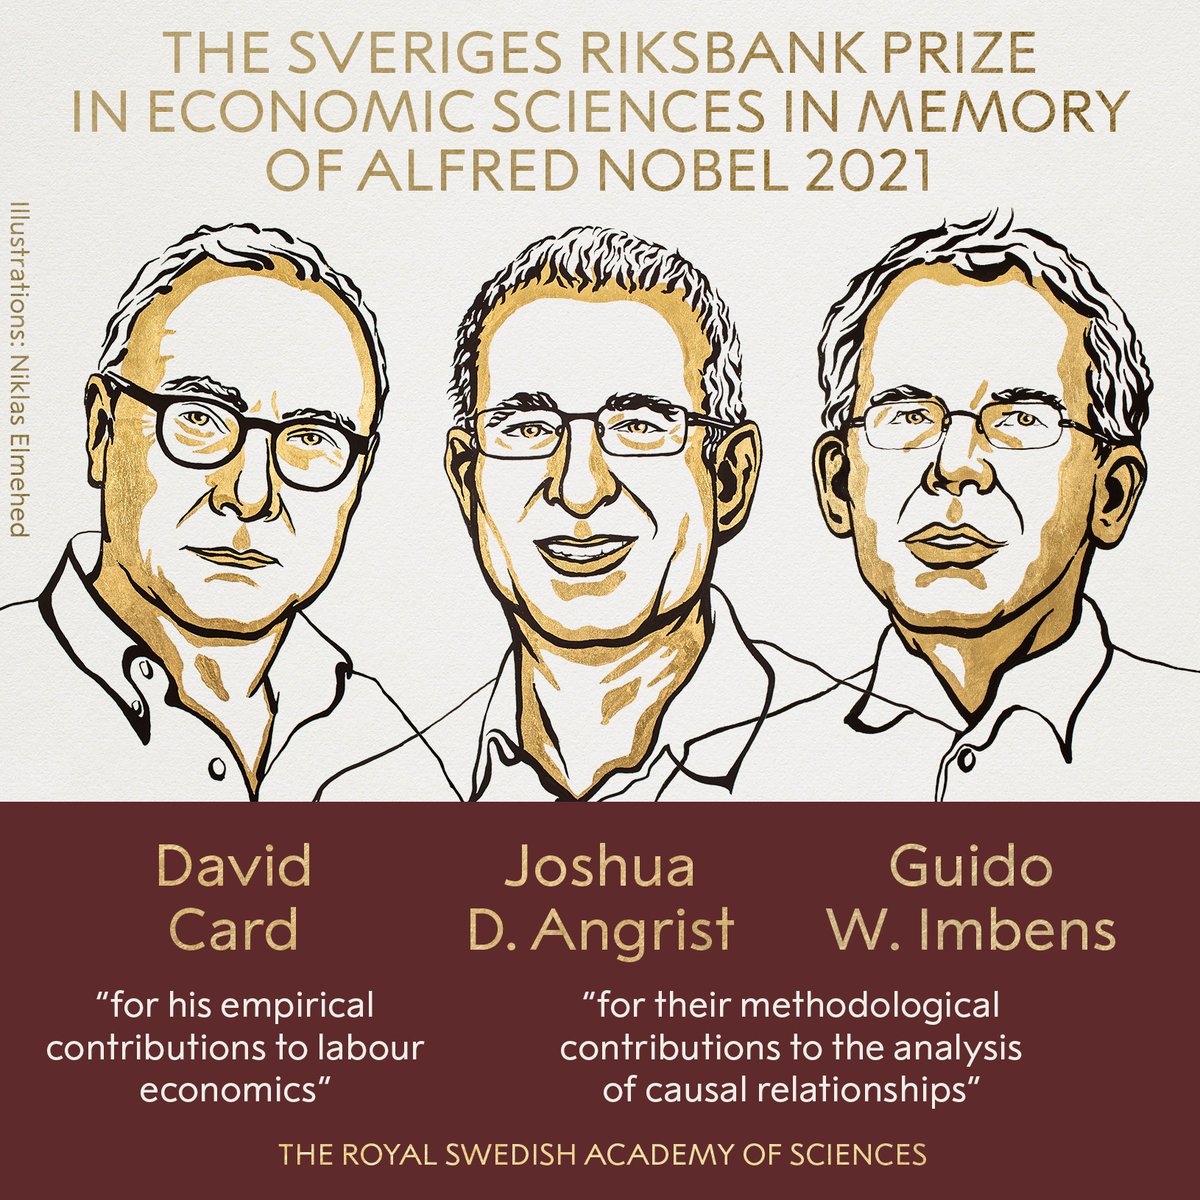 BREAKING NEWS: The 2021 Sveriges Riksbank Prize in Economic Sciences in Memory of Alfred Nobel has been awarded with one half to David Card and the other half jointly to Joshua D. Angrist and Guido W. Imbens. #NobelPrize